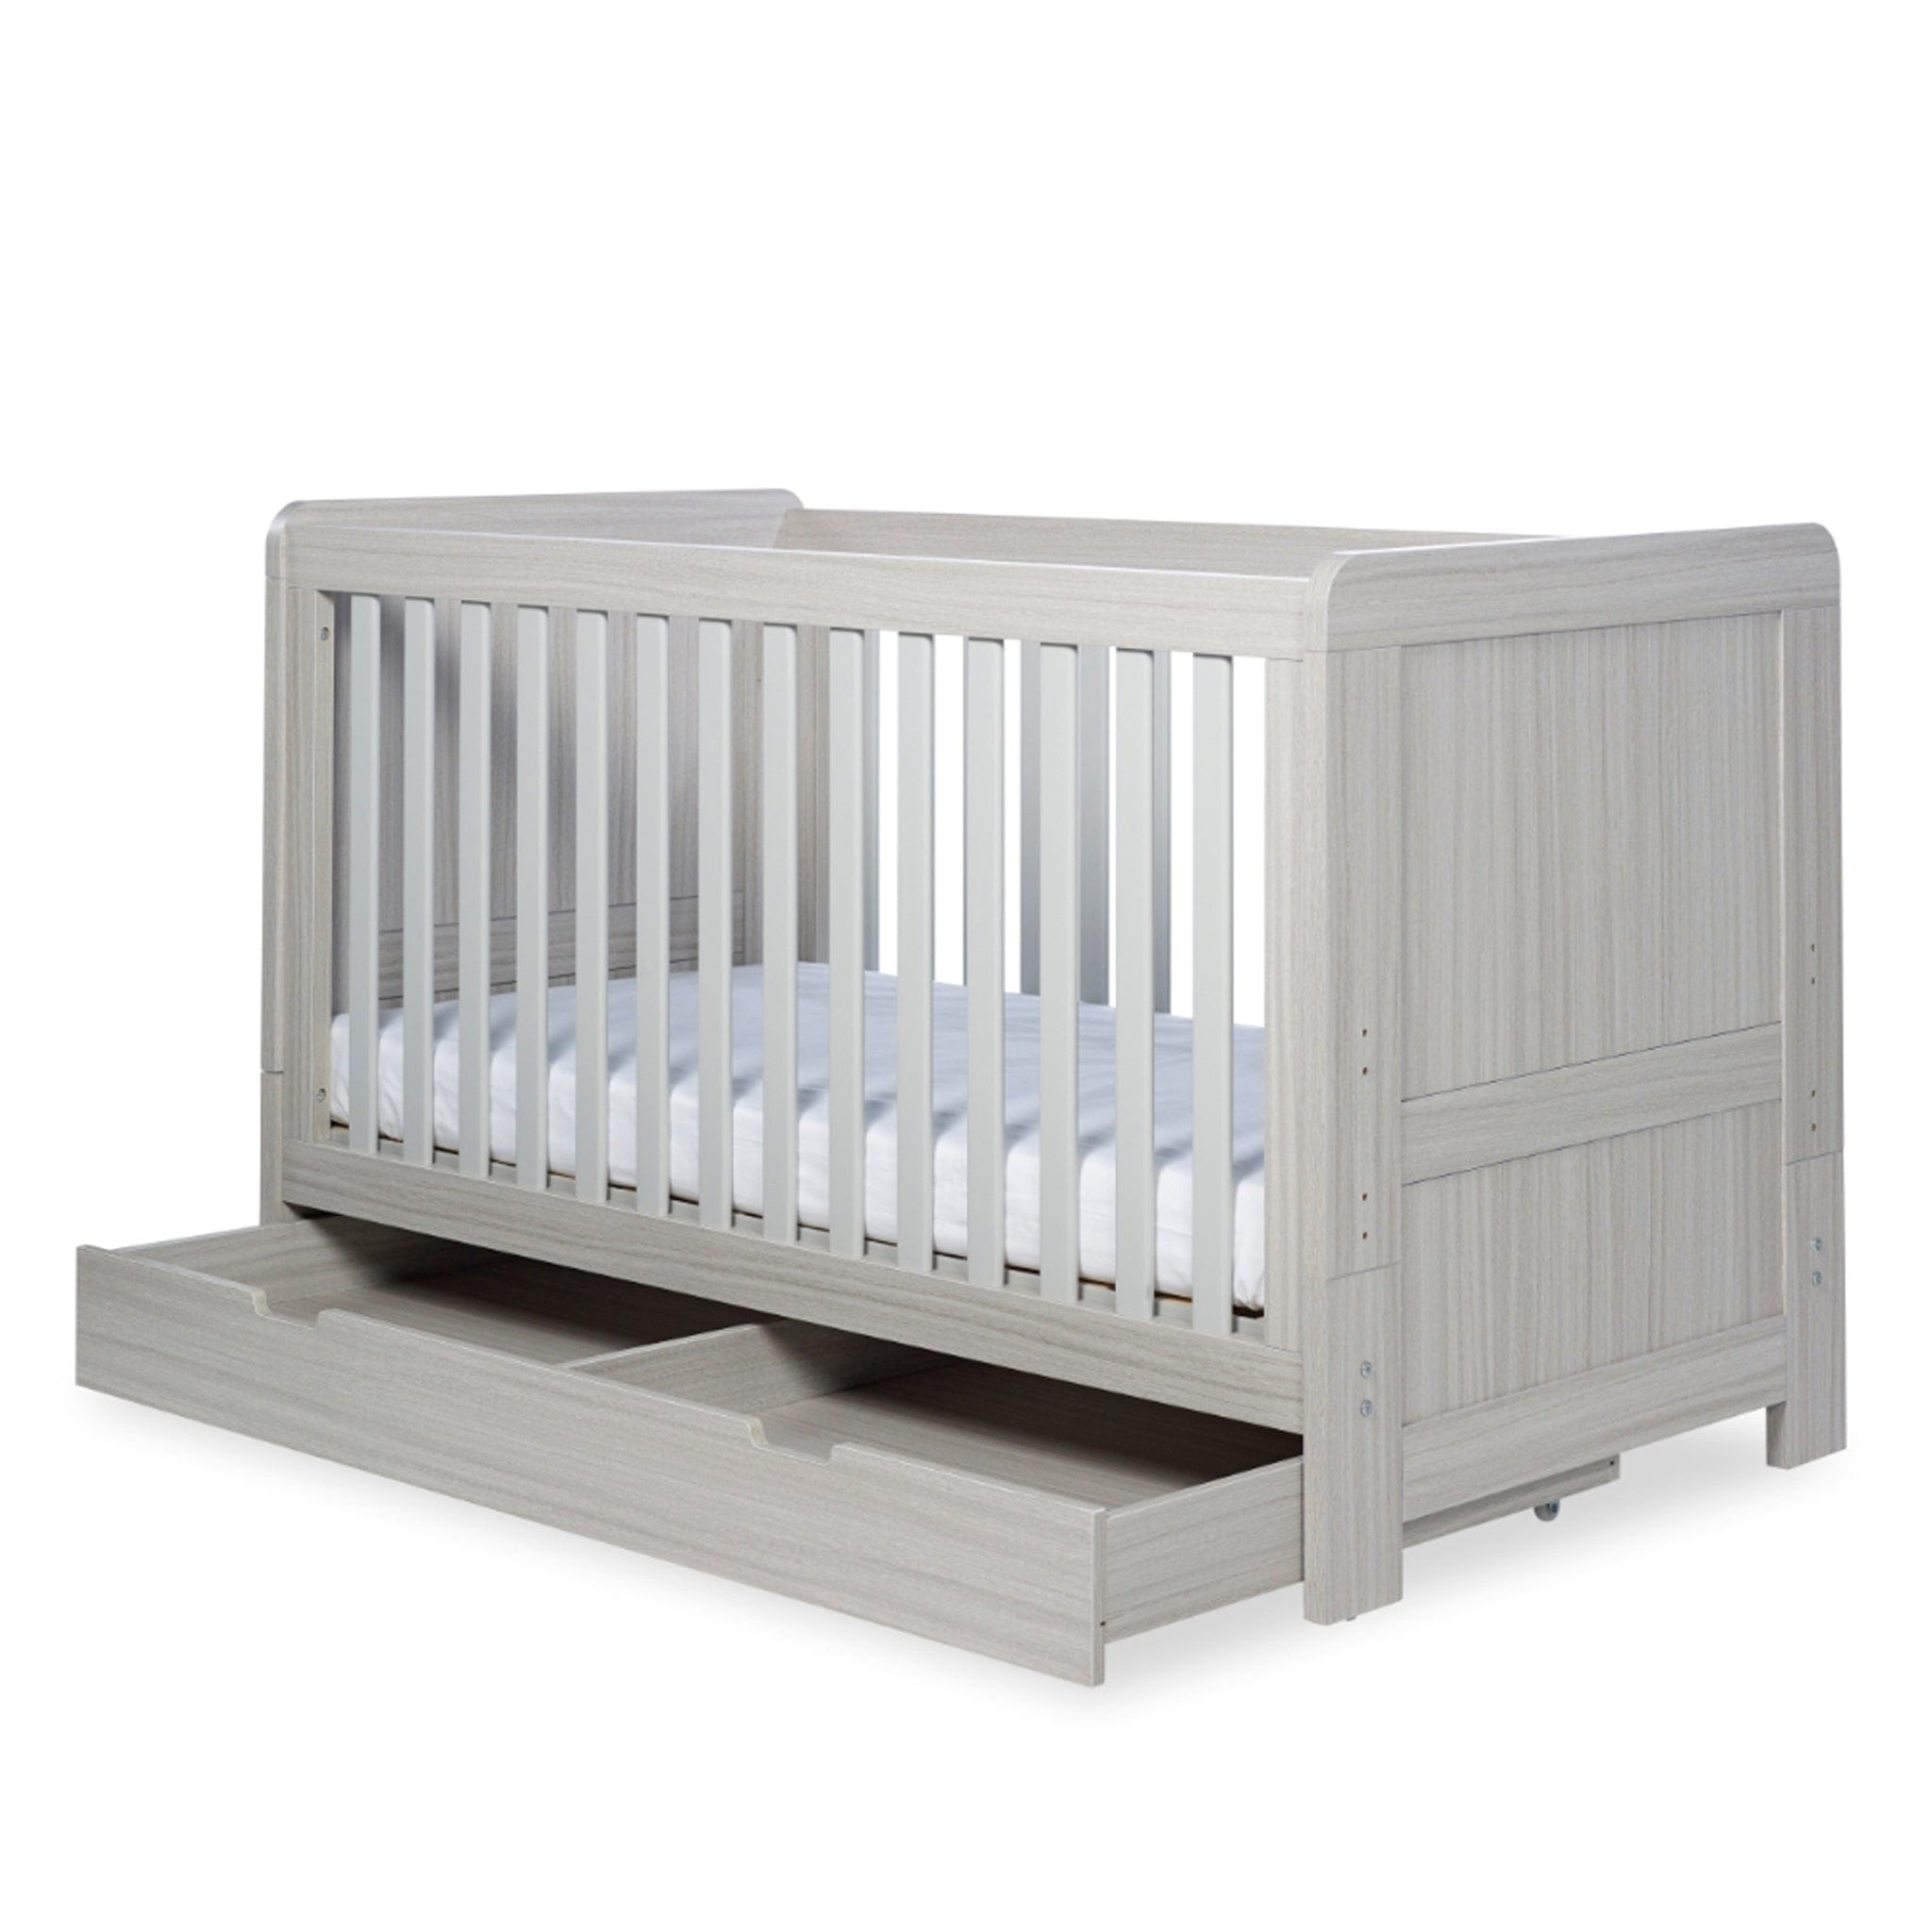 Ickle Bubba Nursery Room Sets Ickle Bubba Pembrey 4 Piece Furniture Set and Under Drawer Ash Grey